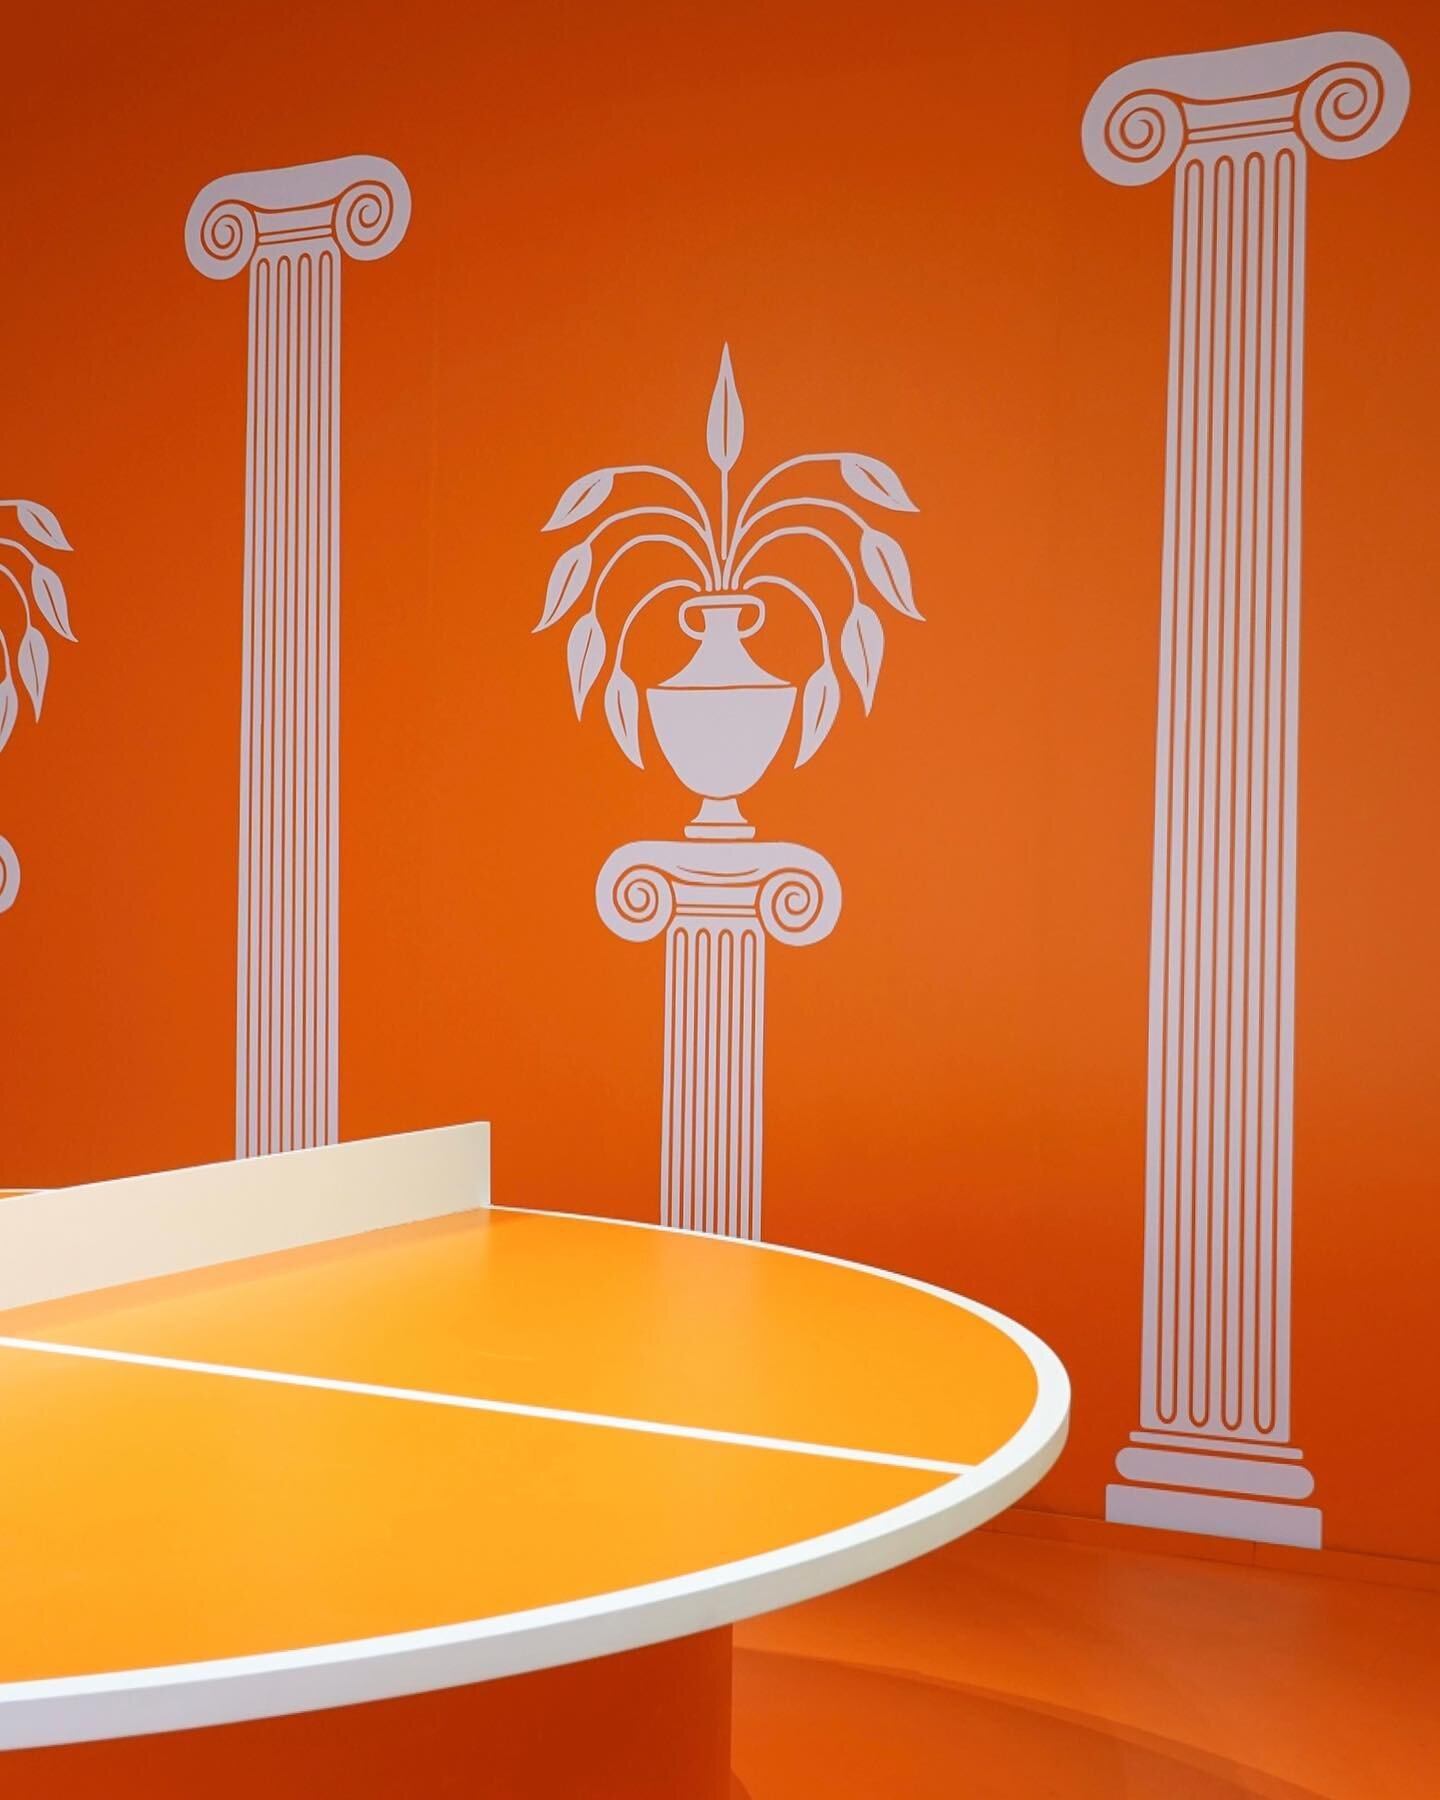 Today is the last day to experience #Herm&egrave;sFit at the Hollywood Athletic Club. We had so much fun playing ping pong on this gorgeous @hermes table!